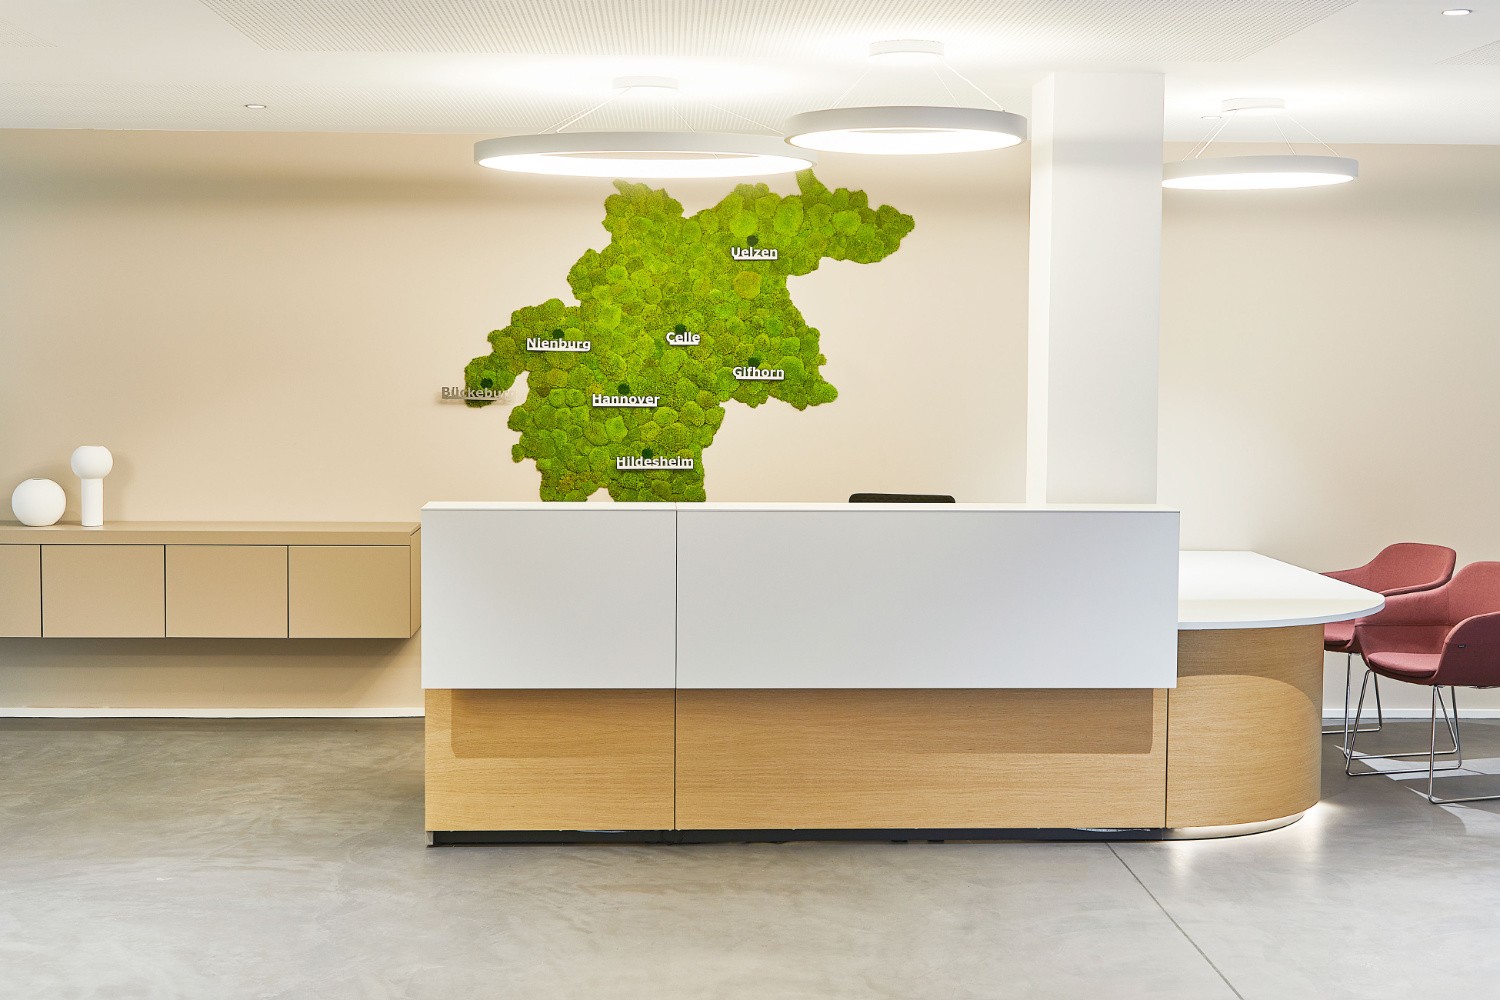 Empfang - PSD Bank Hannover - designed by seydlitz.works - case study